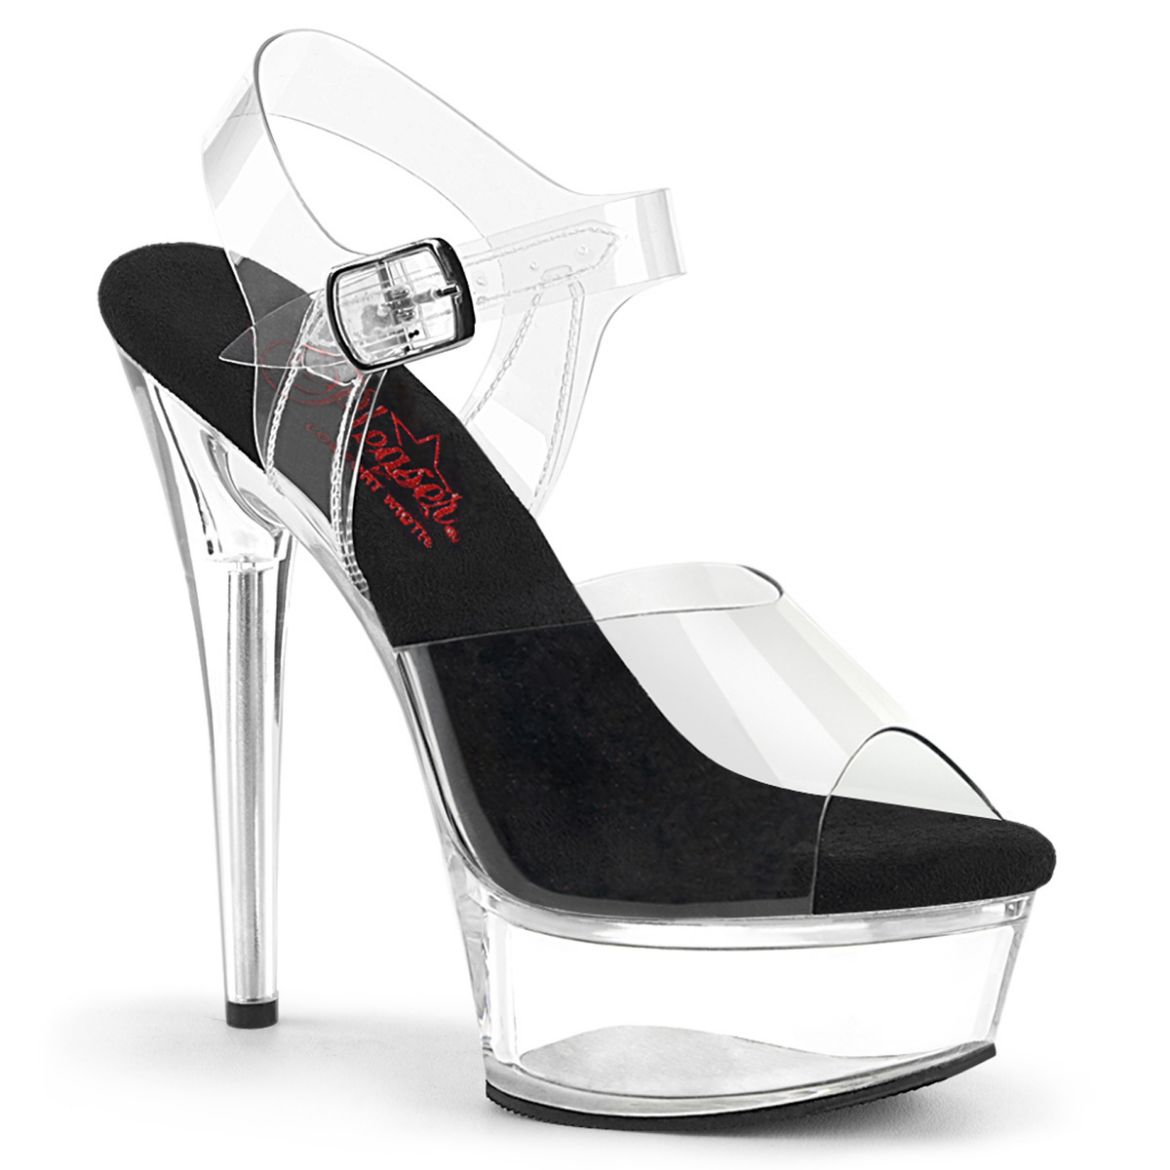 Product image of Pleaser EXCITE-608 Clr-Blk/Clr 6 Inch Heel 1 3/4 Inch PF Comfort Width Ankle Strap Sandal